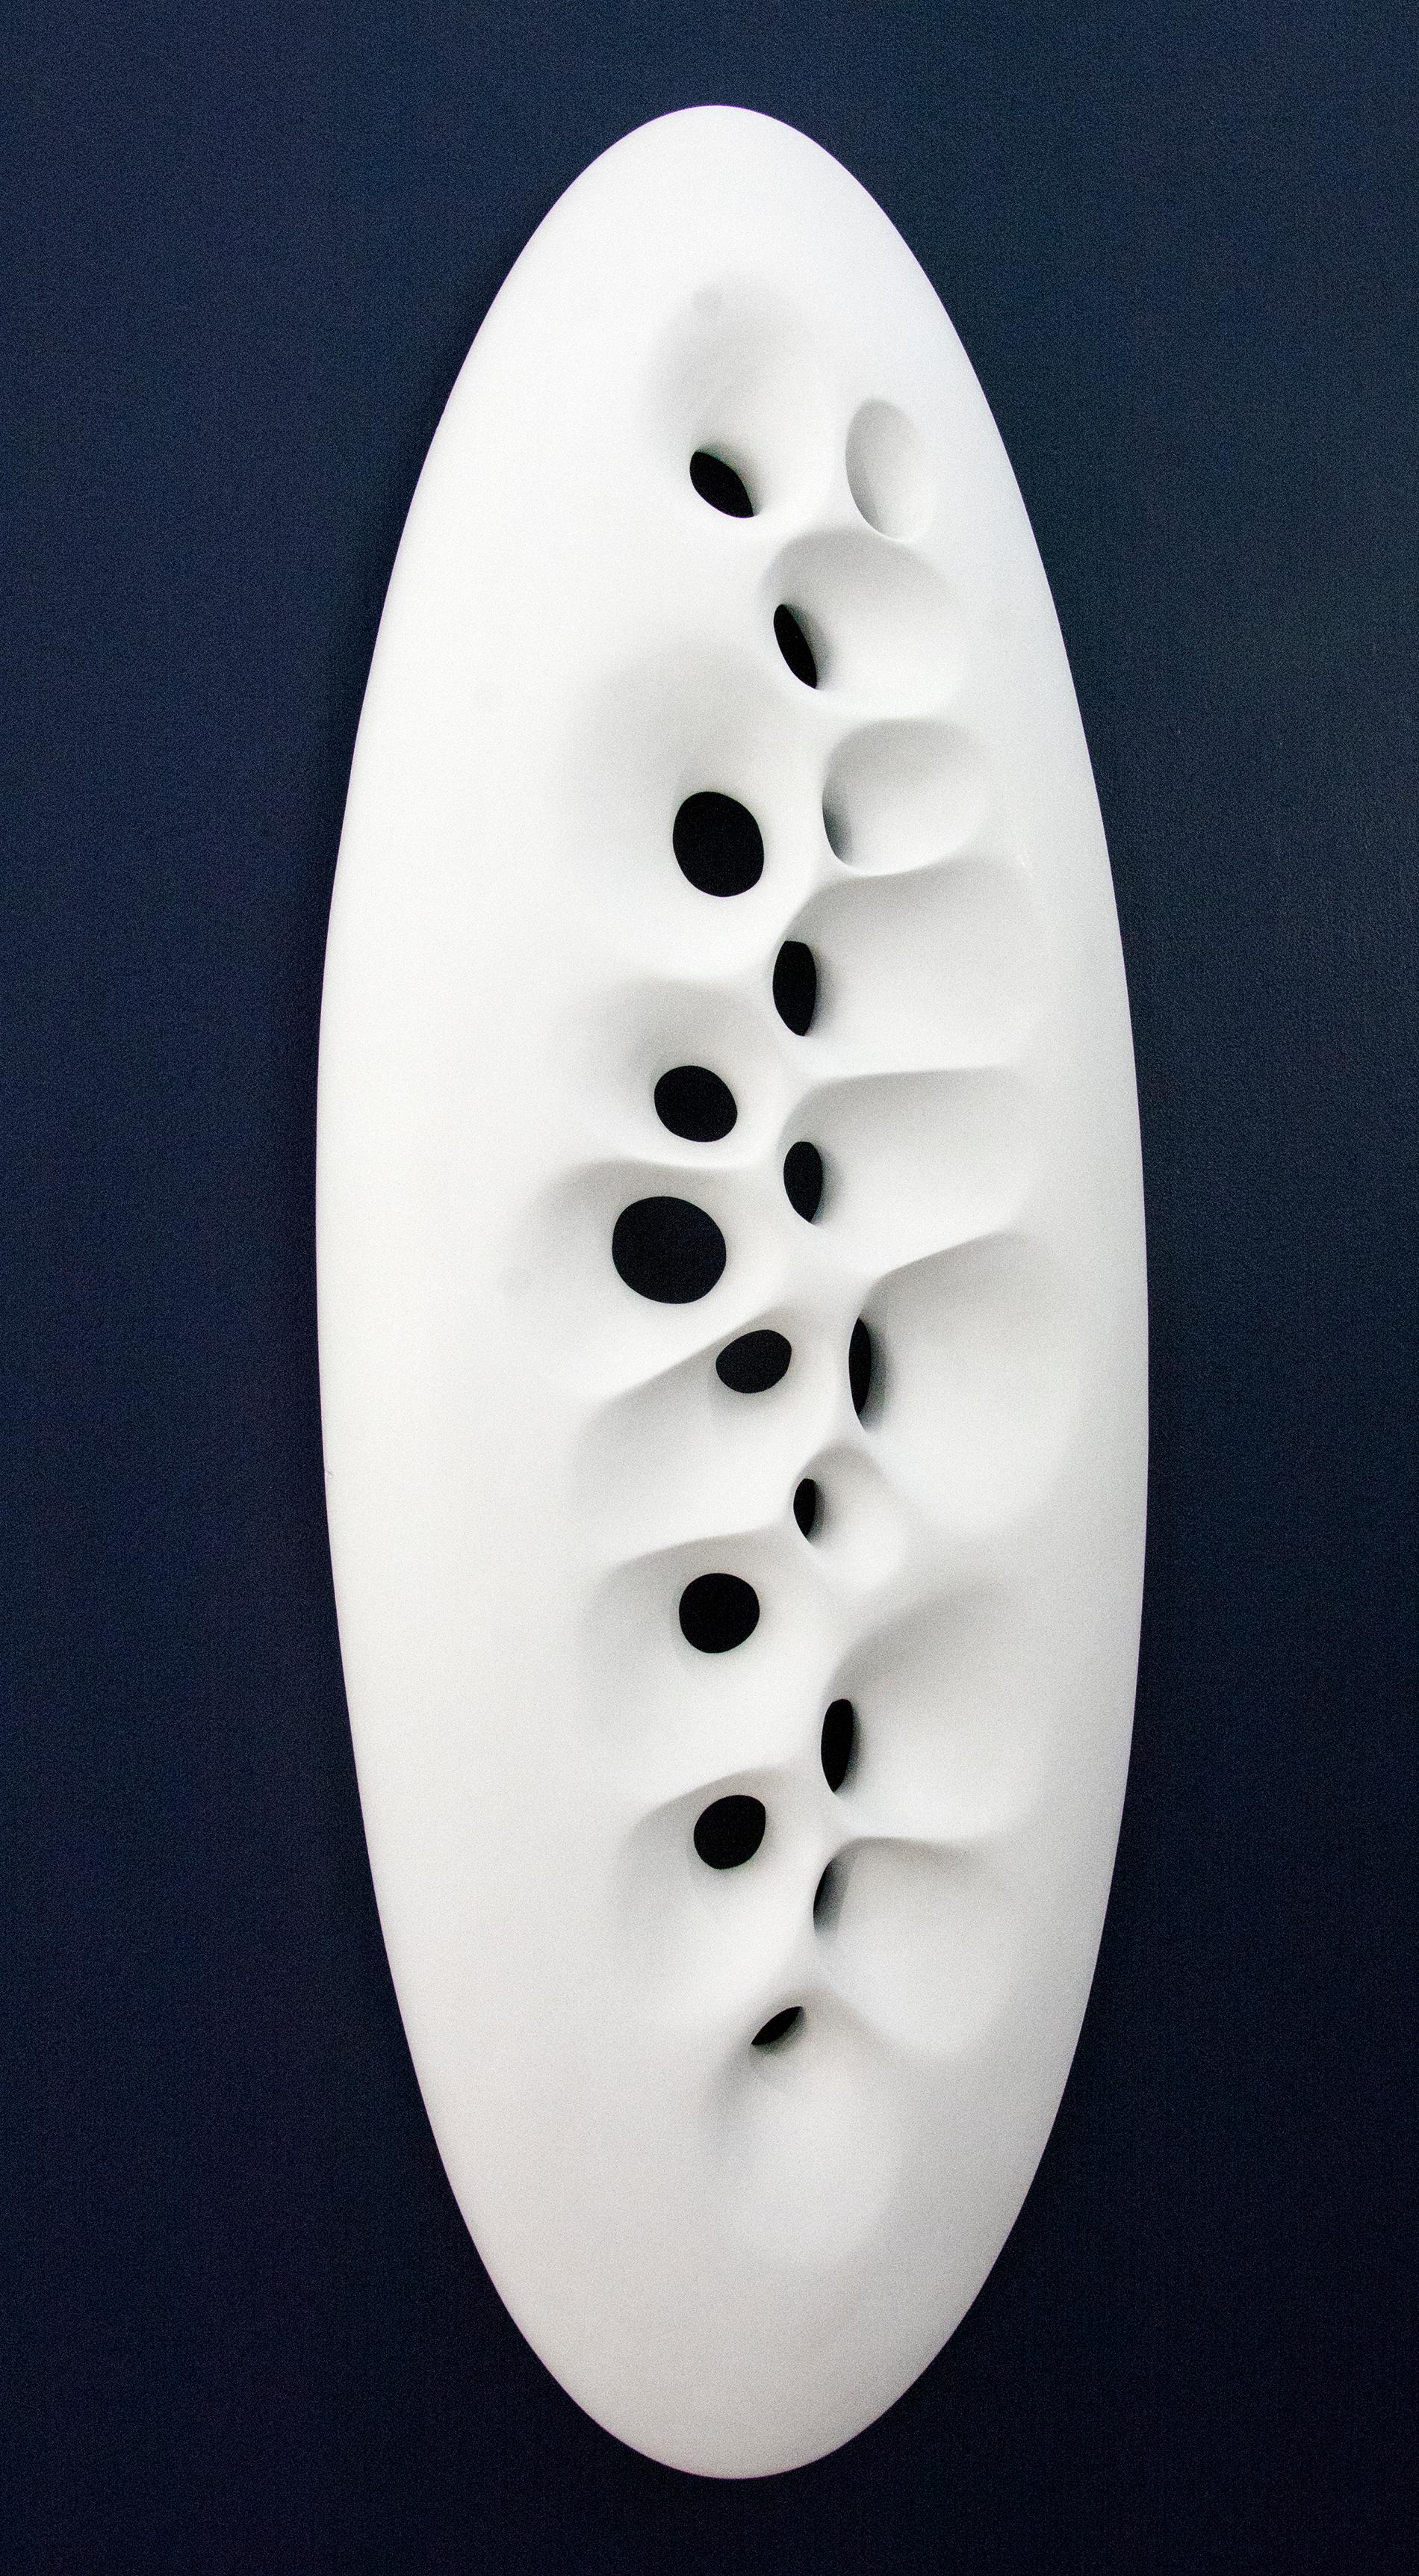 Biomorphic No 6 - Sculpture by Jana Osterman